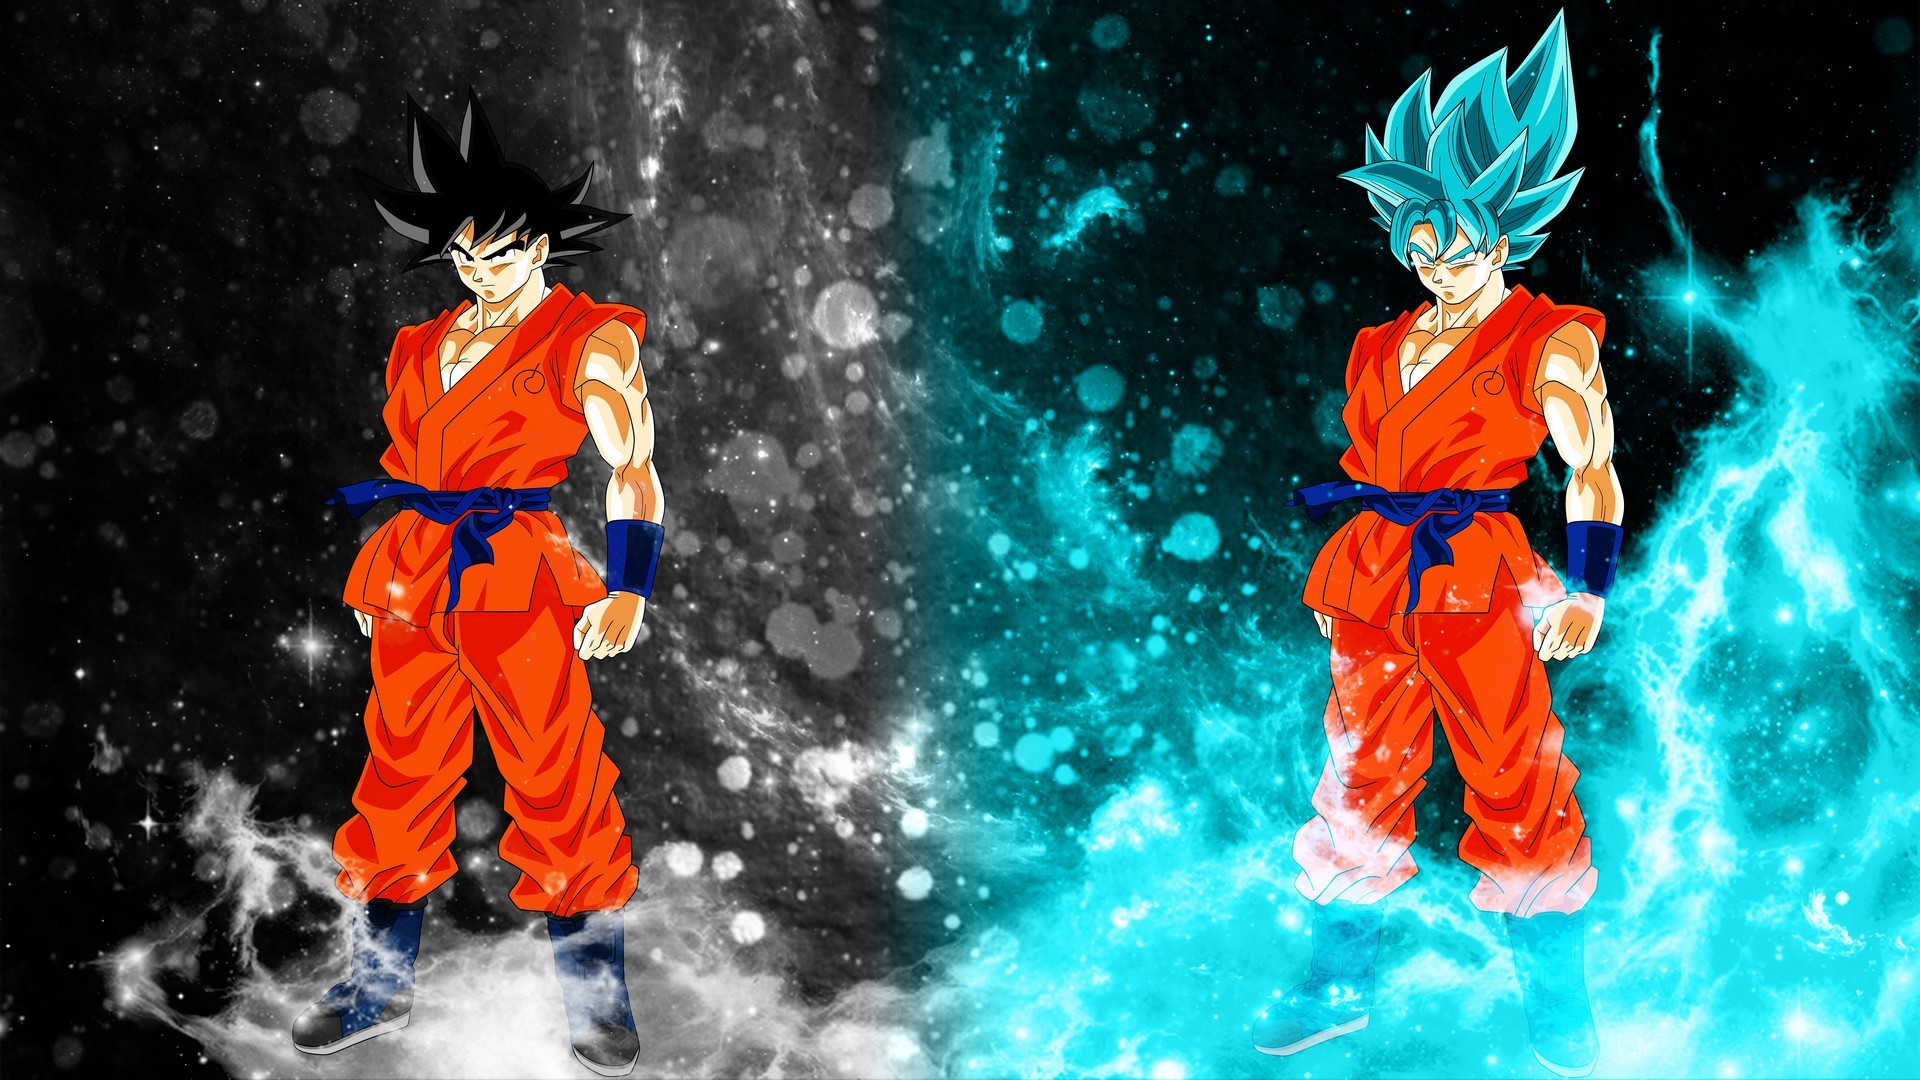 Goku SSJ Blue Wallpaper with resolution 1920X1080 pixel. You can use this wallpaper as background for your desktop Computer Screensavers, Android or iPhone smartphones